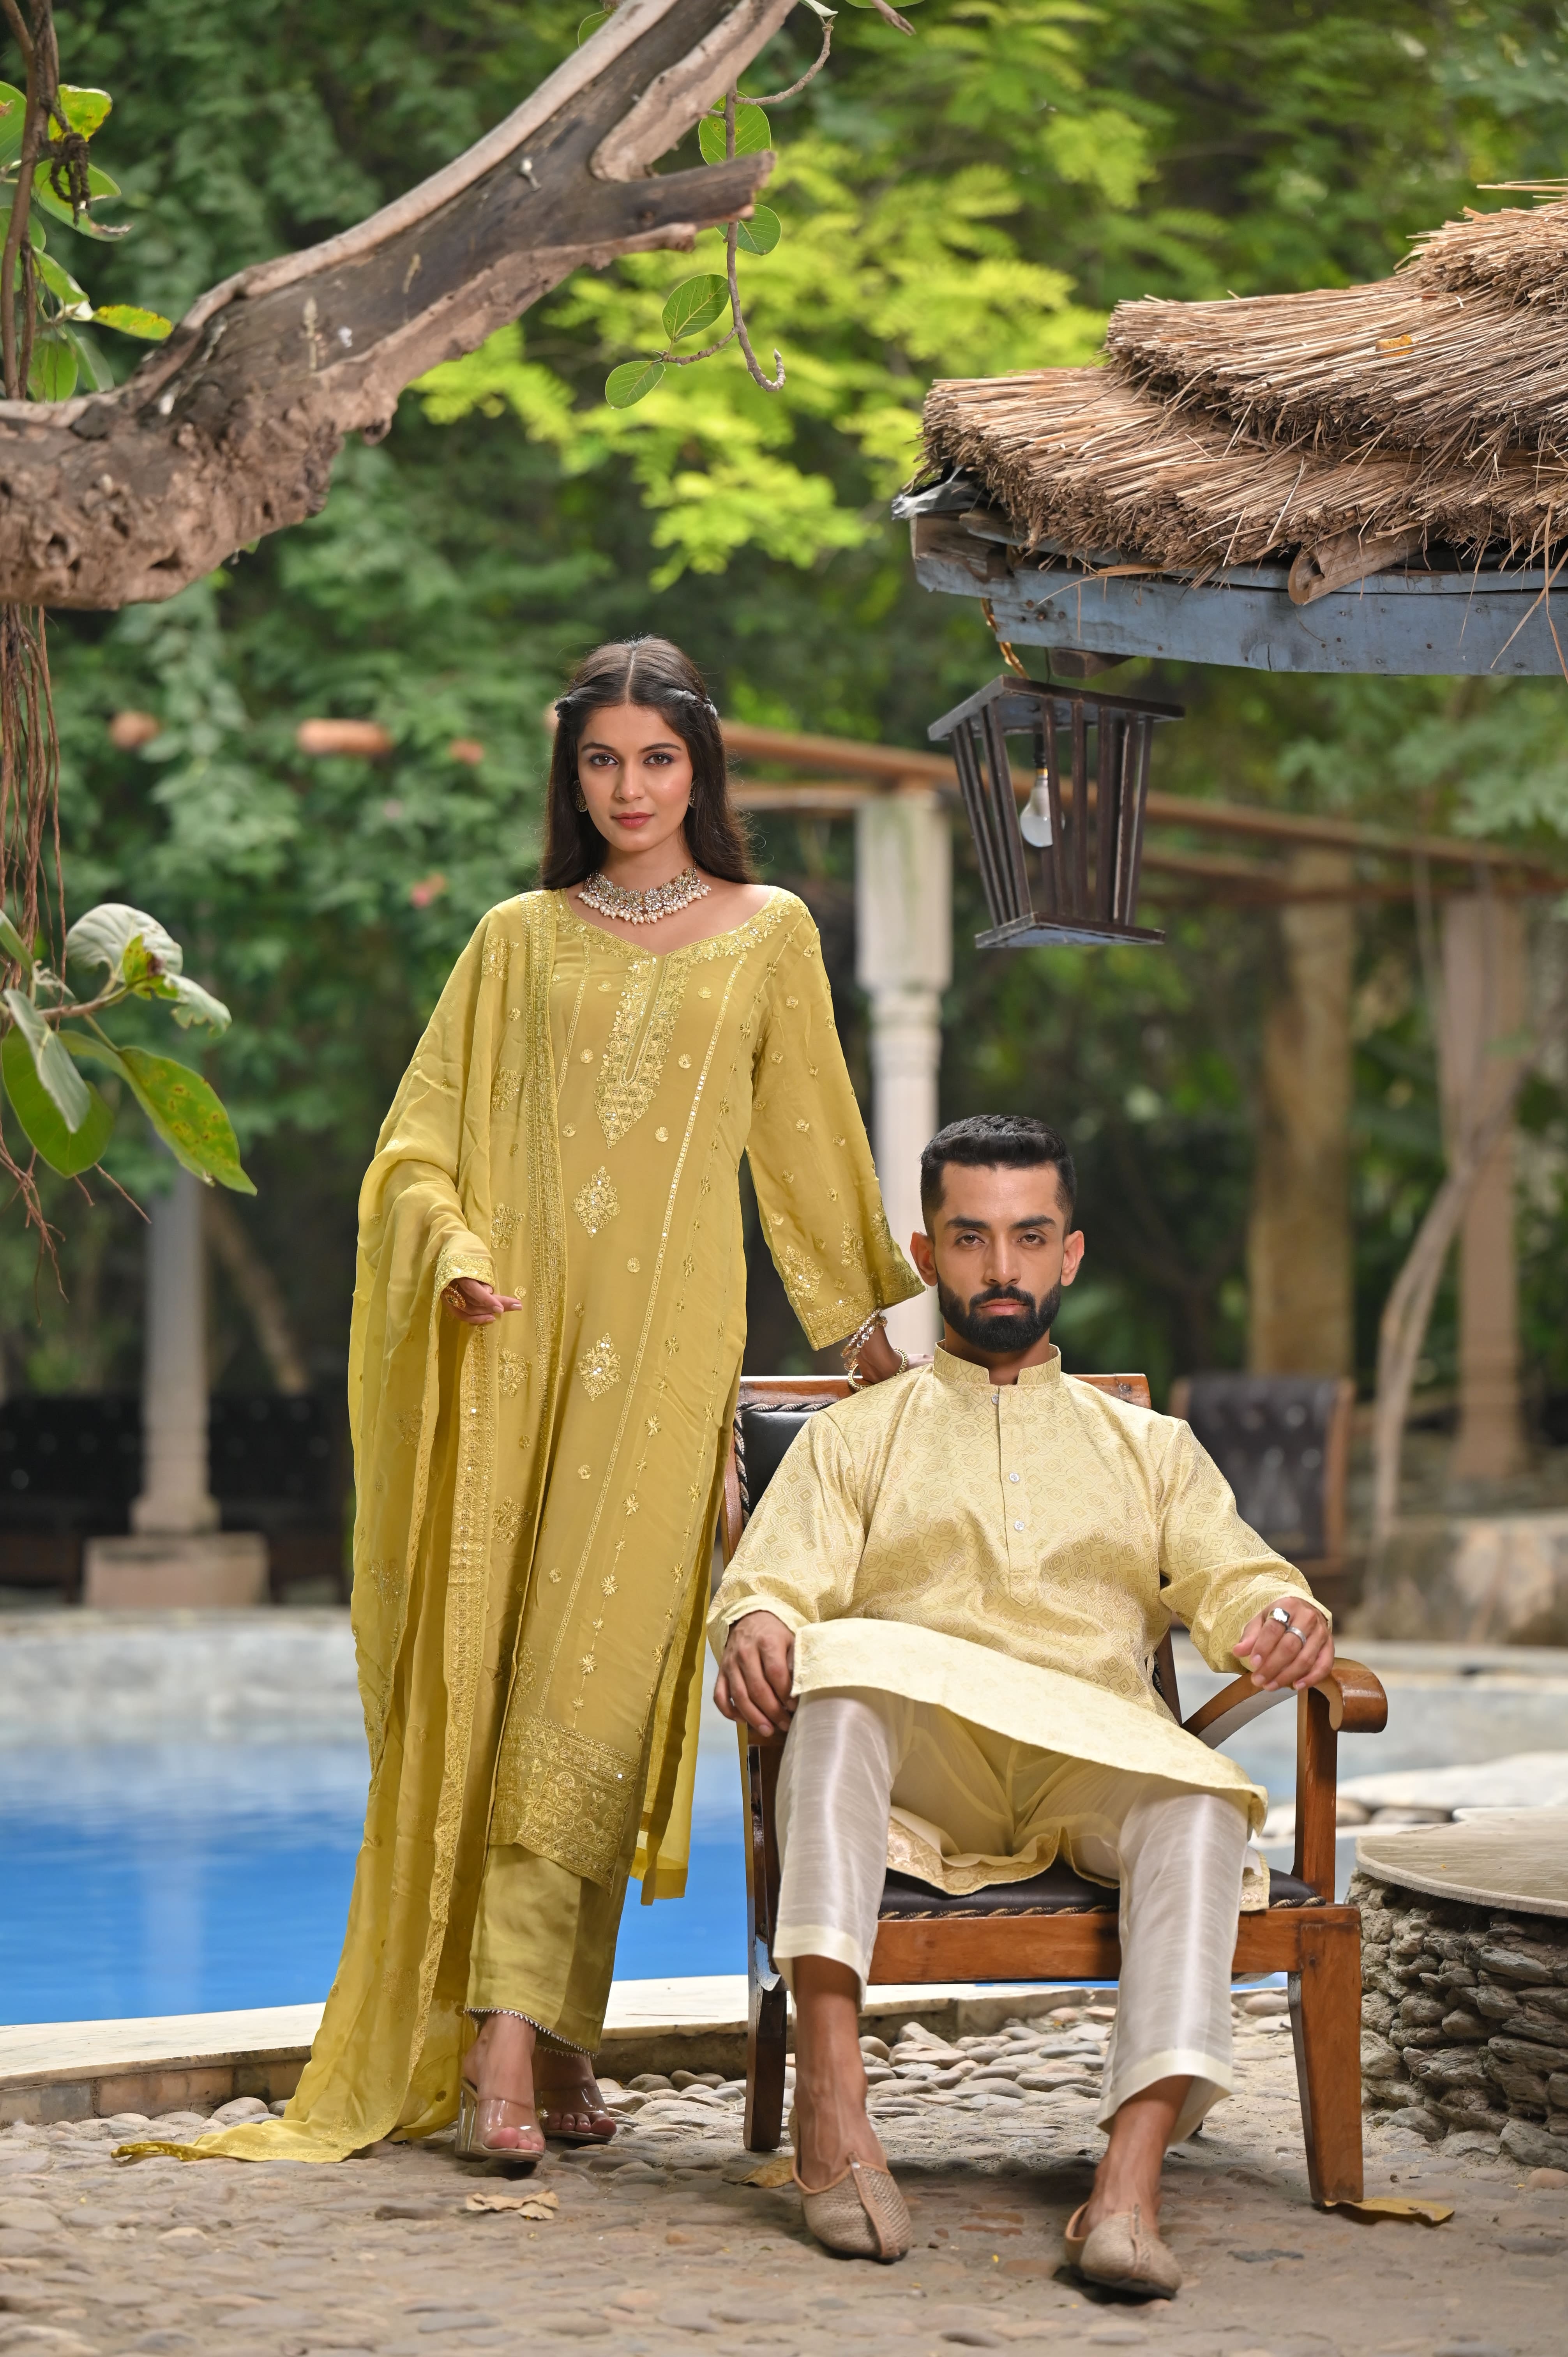 2020's Best Coordinated Wedding Outfits - Couples That Set Goals For Matching  Outfits ! - Witty Vows | Wedding matching outfits, Indian wedding outfits,  Groom dress men